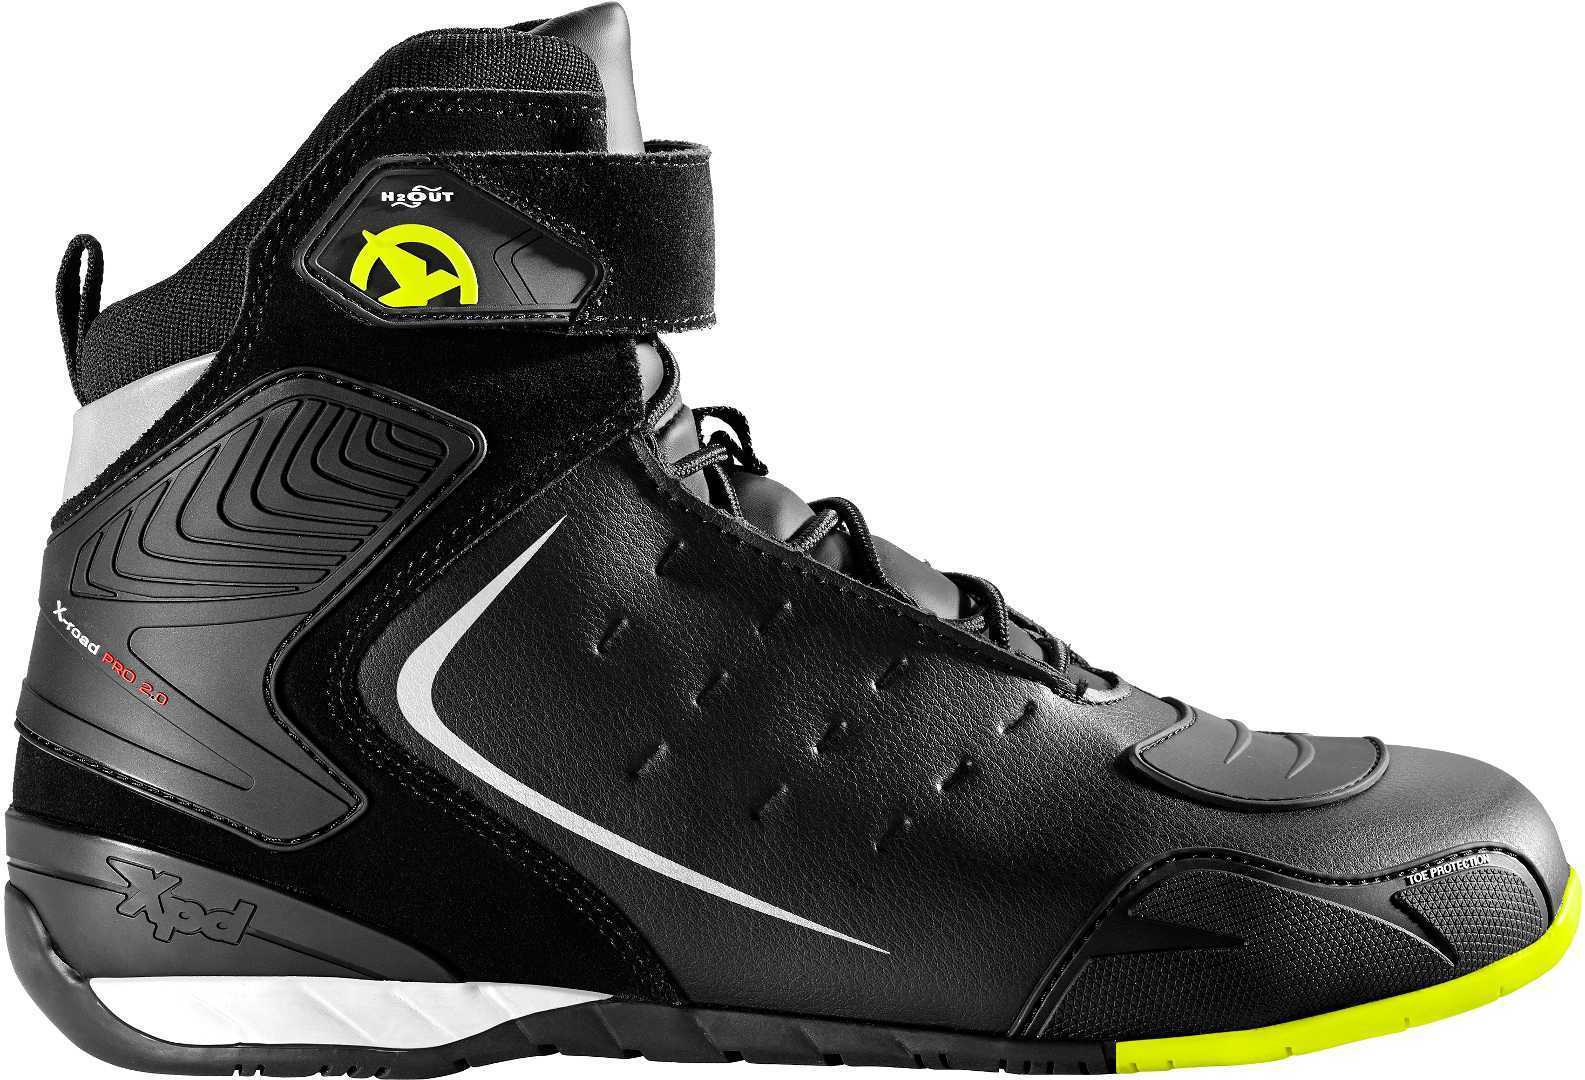 Image of EU XPD X-Road H2Out Jaune Fluo Chaussures Taille 44